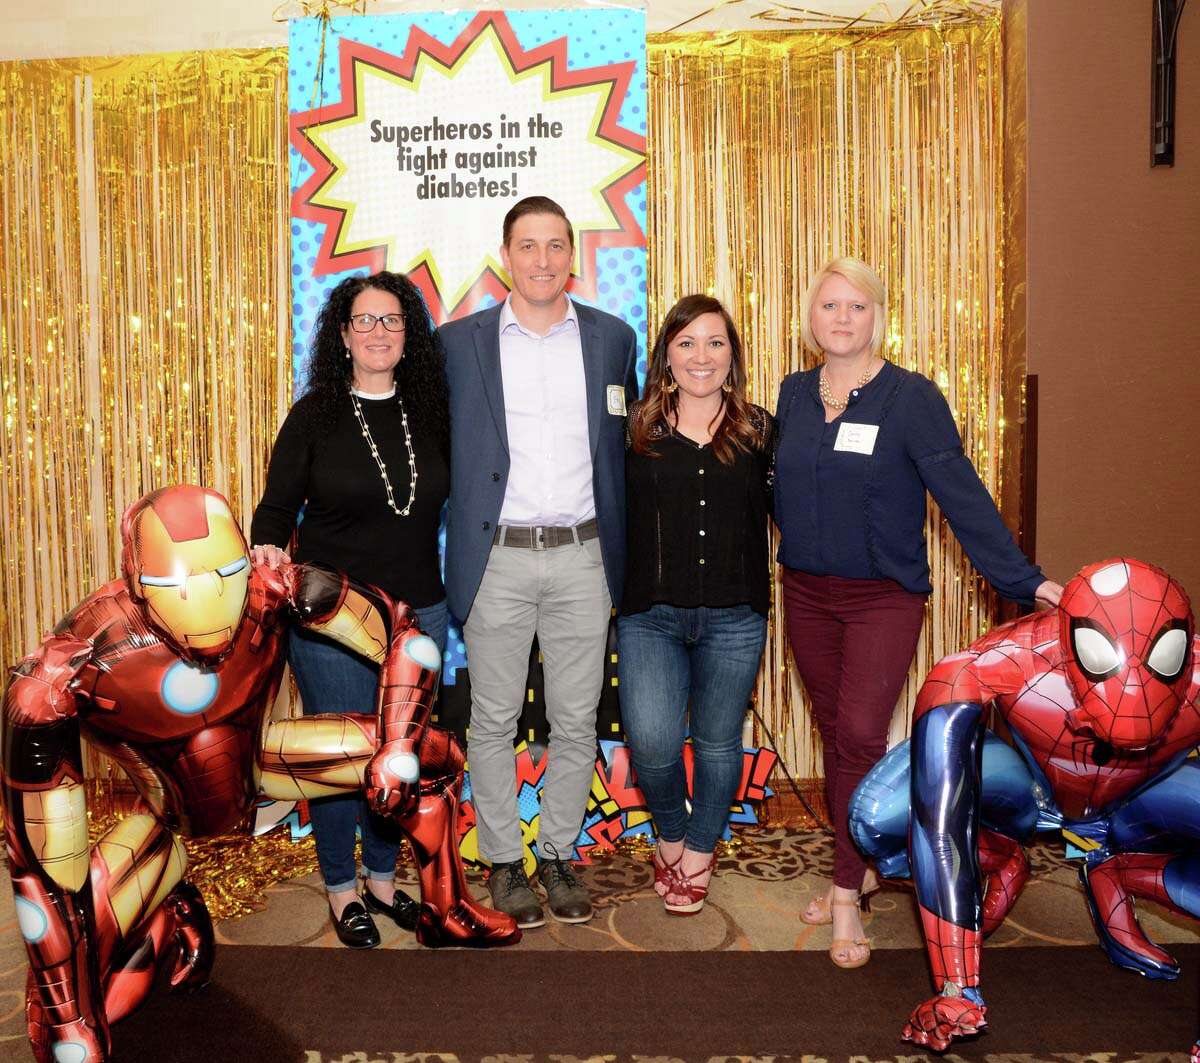 Were you Seen at the Champion's Dinner for the 2019 Tour de Cure: Capital Region, a fundraiser for the American Diabetes Association, on May 29, 2019?